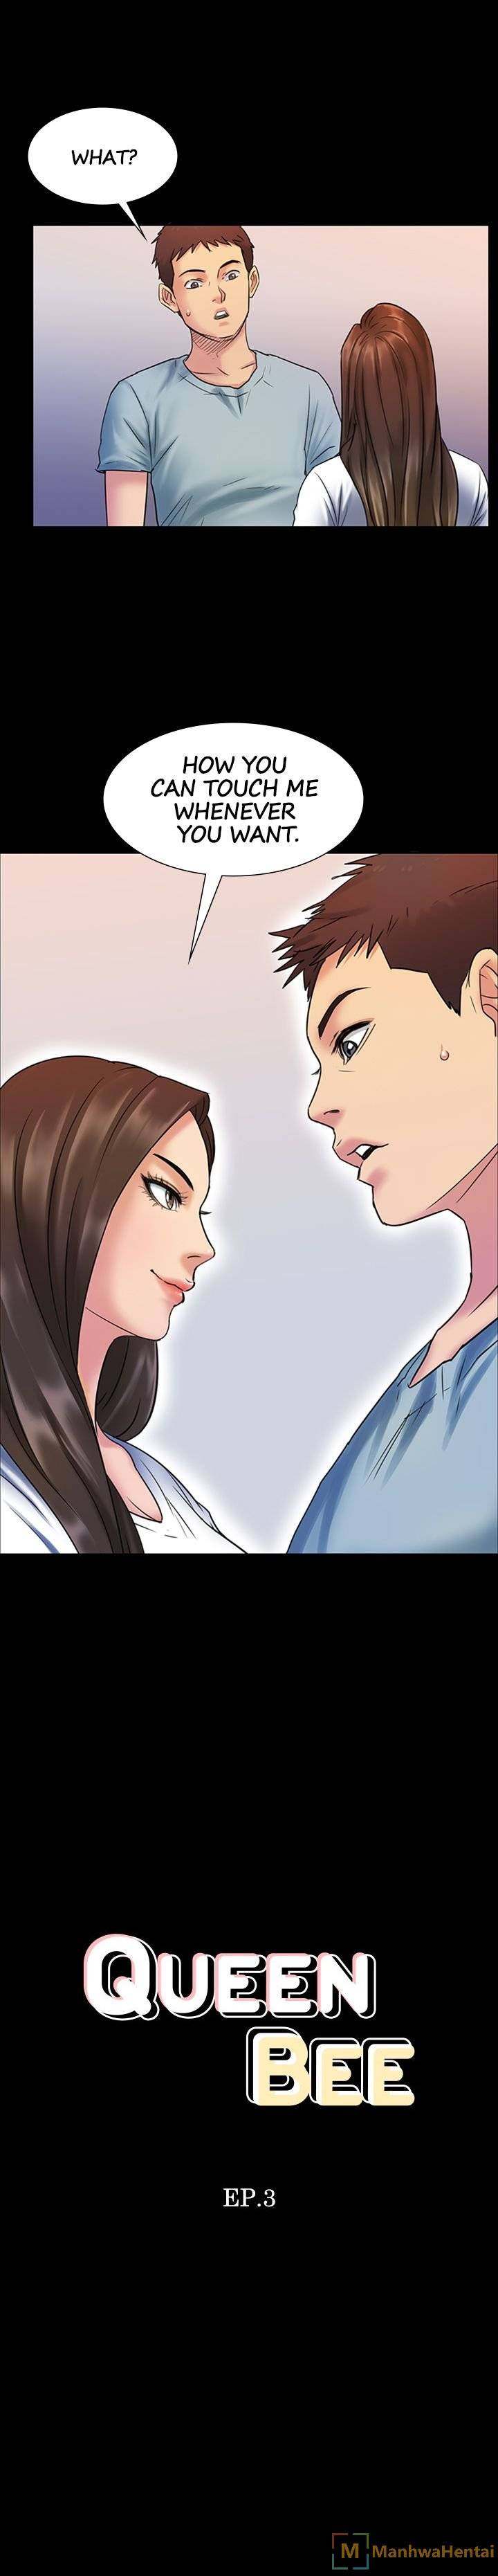 Panel Image 1 for chapter 3 of manhwa Queen Bee on read.oppai.stream